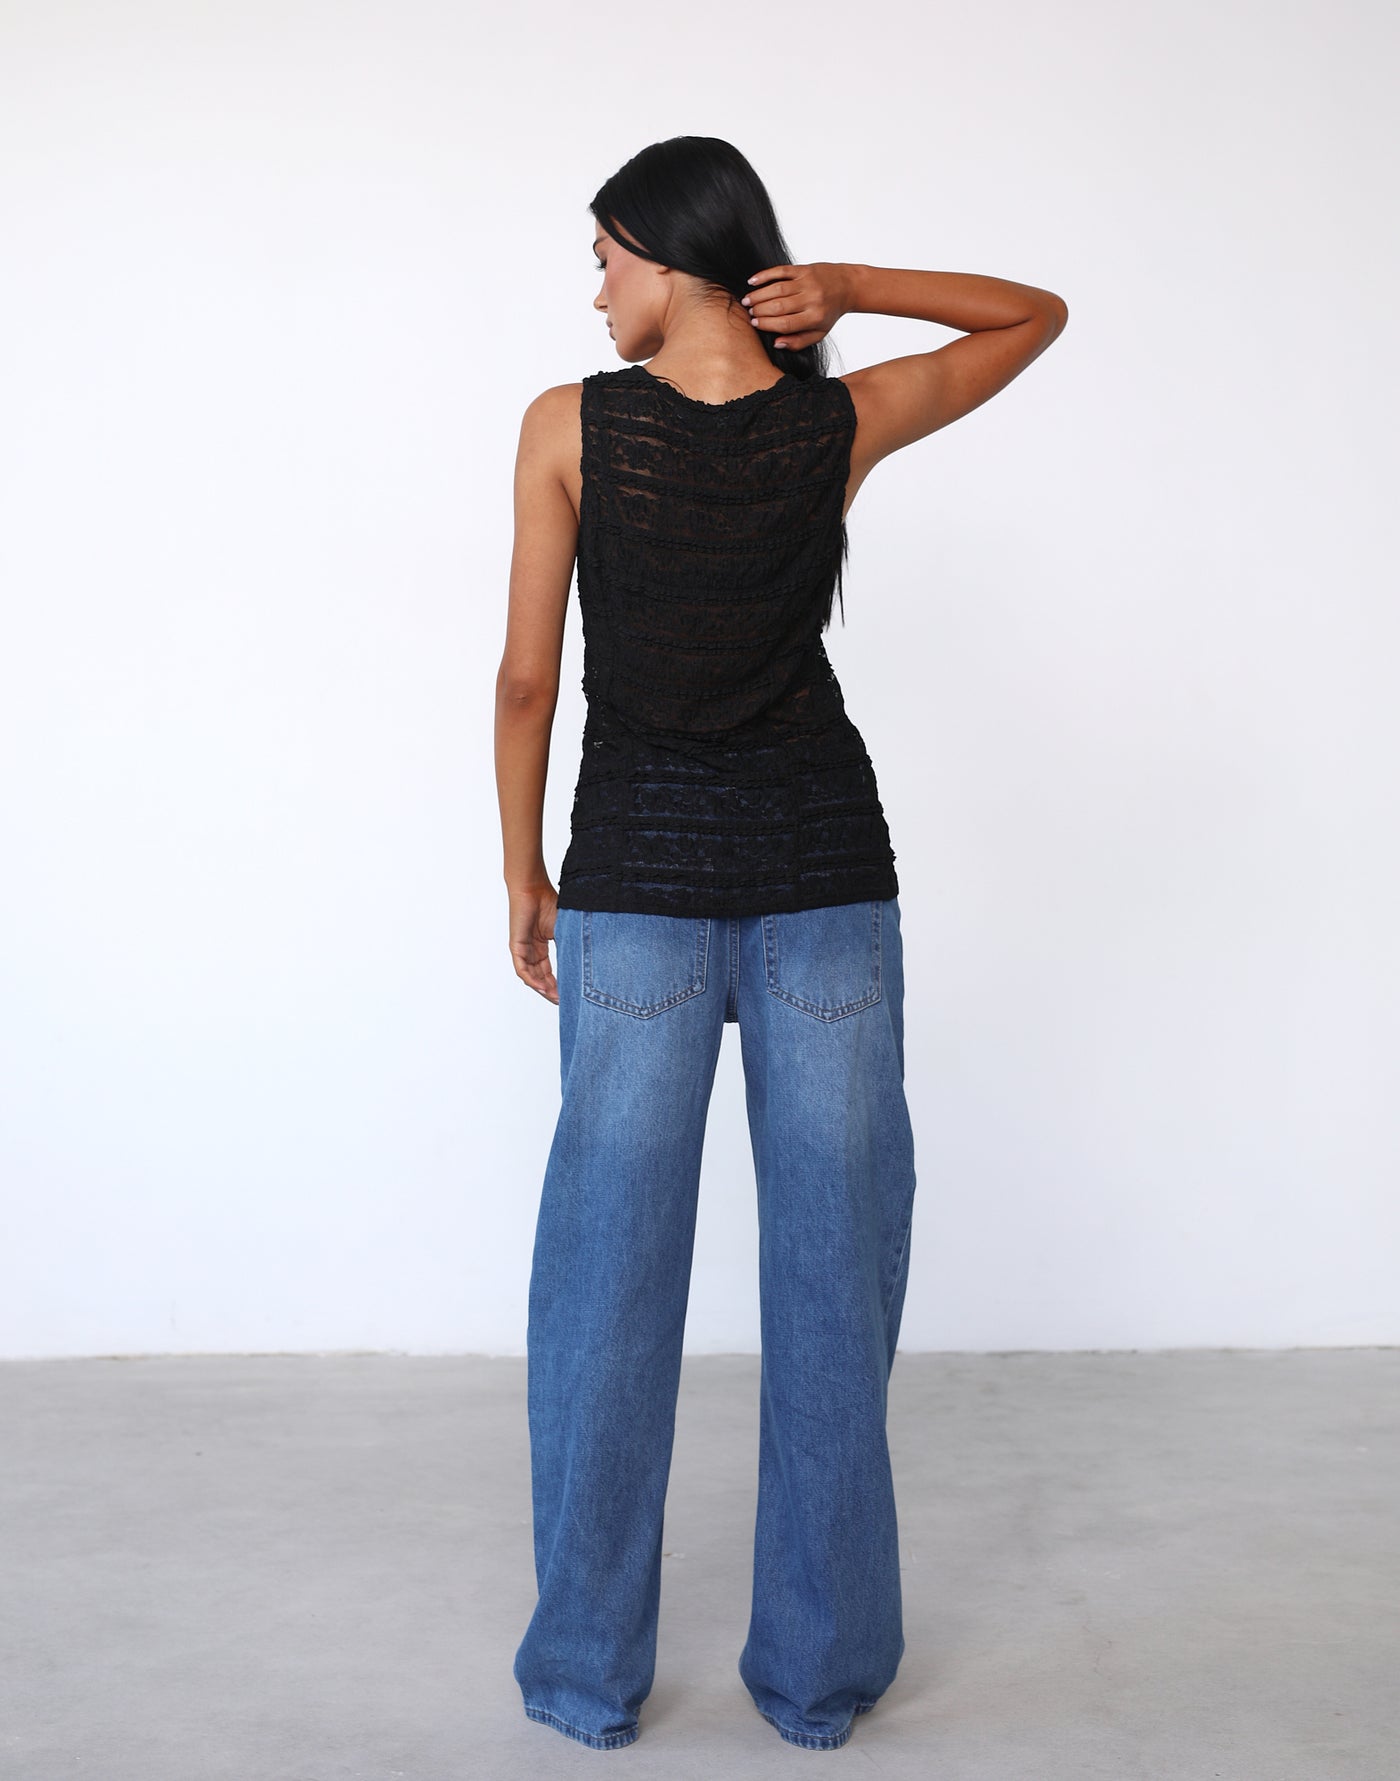 Olsen Vest (Onyx) - By Lioness - Sheer Black Lace Top - Women's Tops - Charcoal Clothing